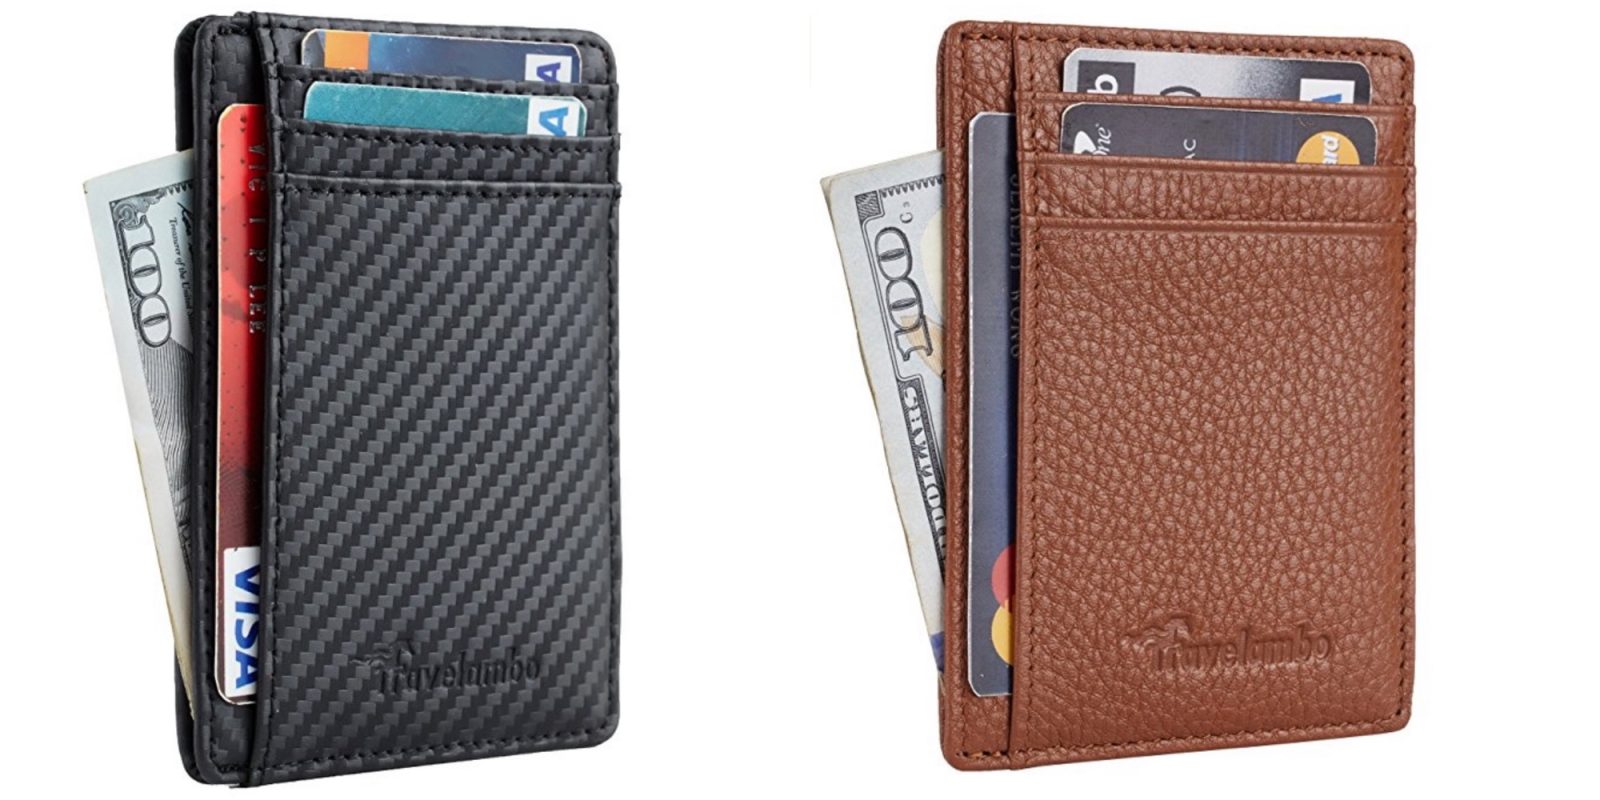 Front Pocket Leather Slim Wallets w/ RFID Blocking for $12 Prime shipped - 9to5Toys